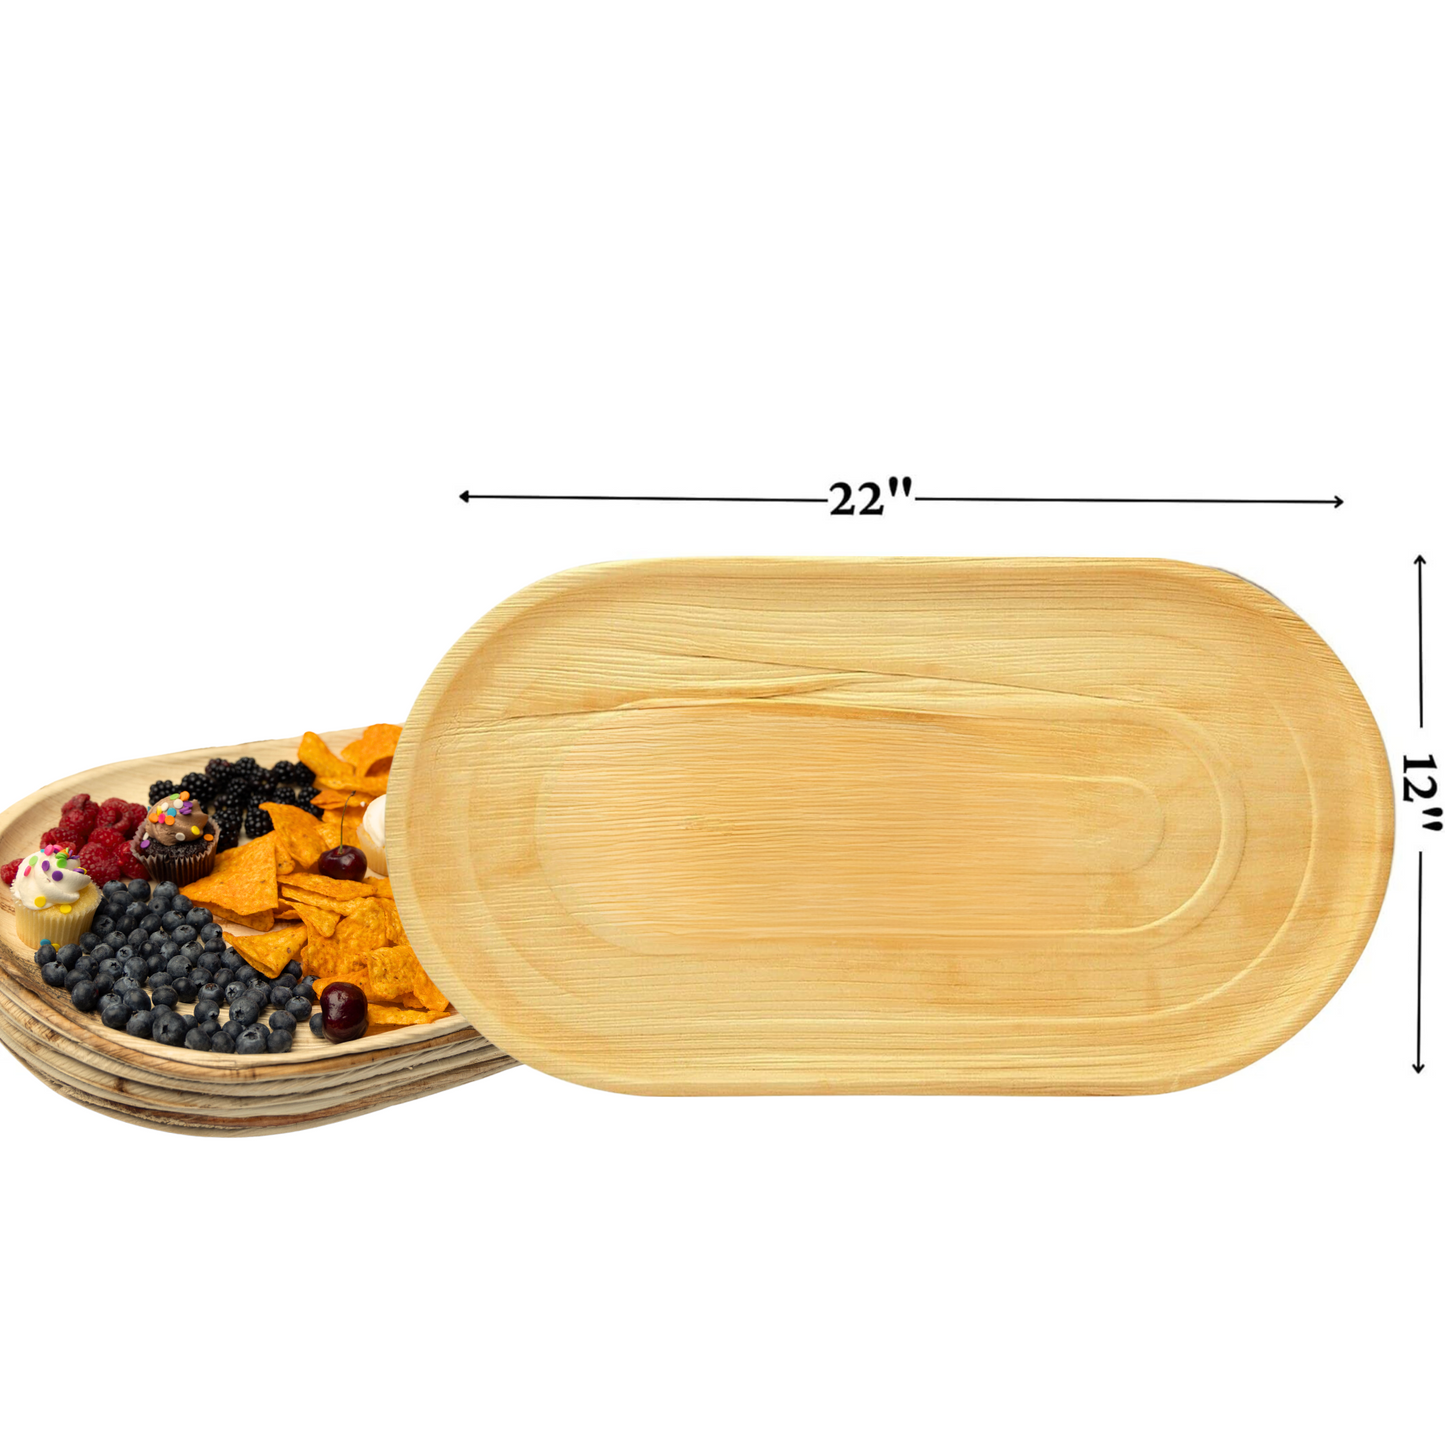 10 Oval Disposable Charcuterie Board 22"x12" Palm Leaf Tray